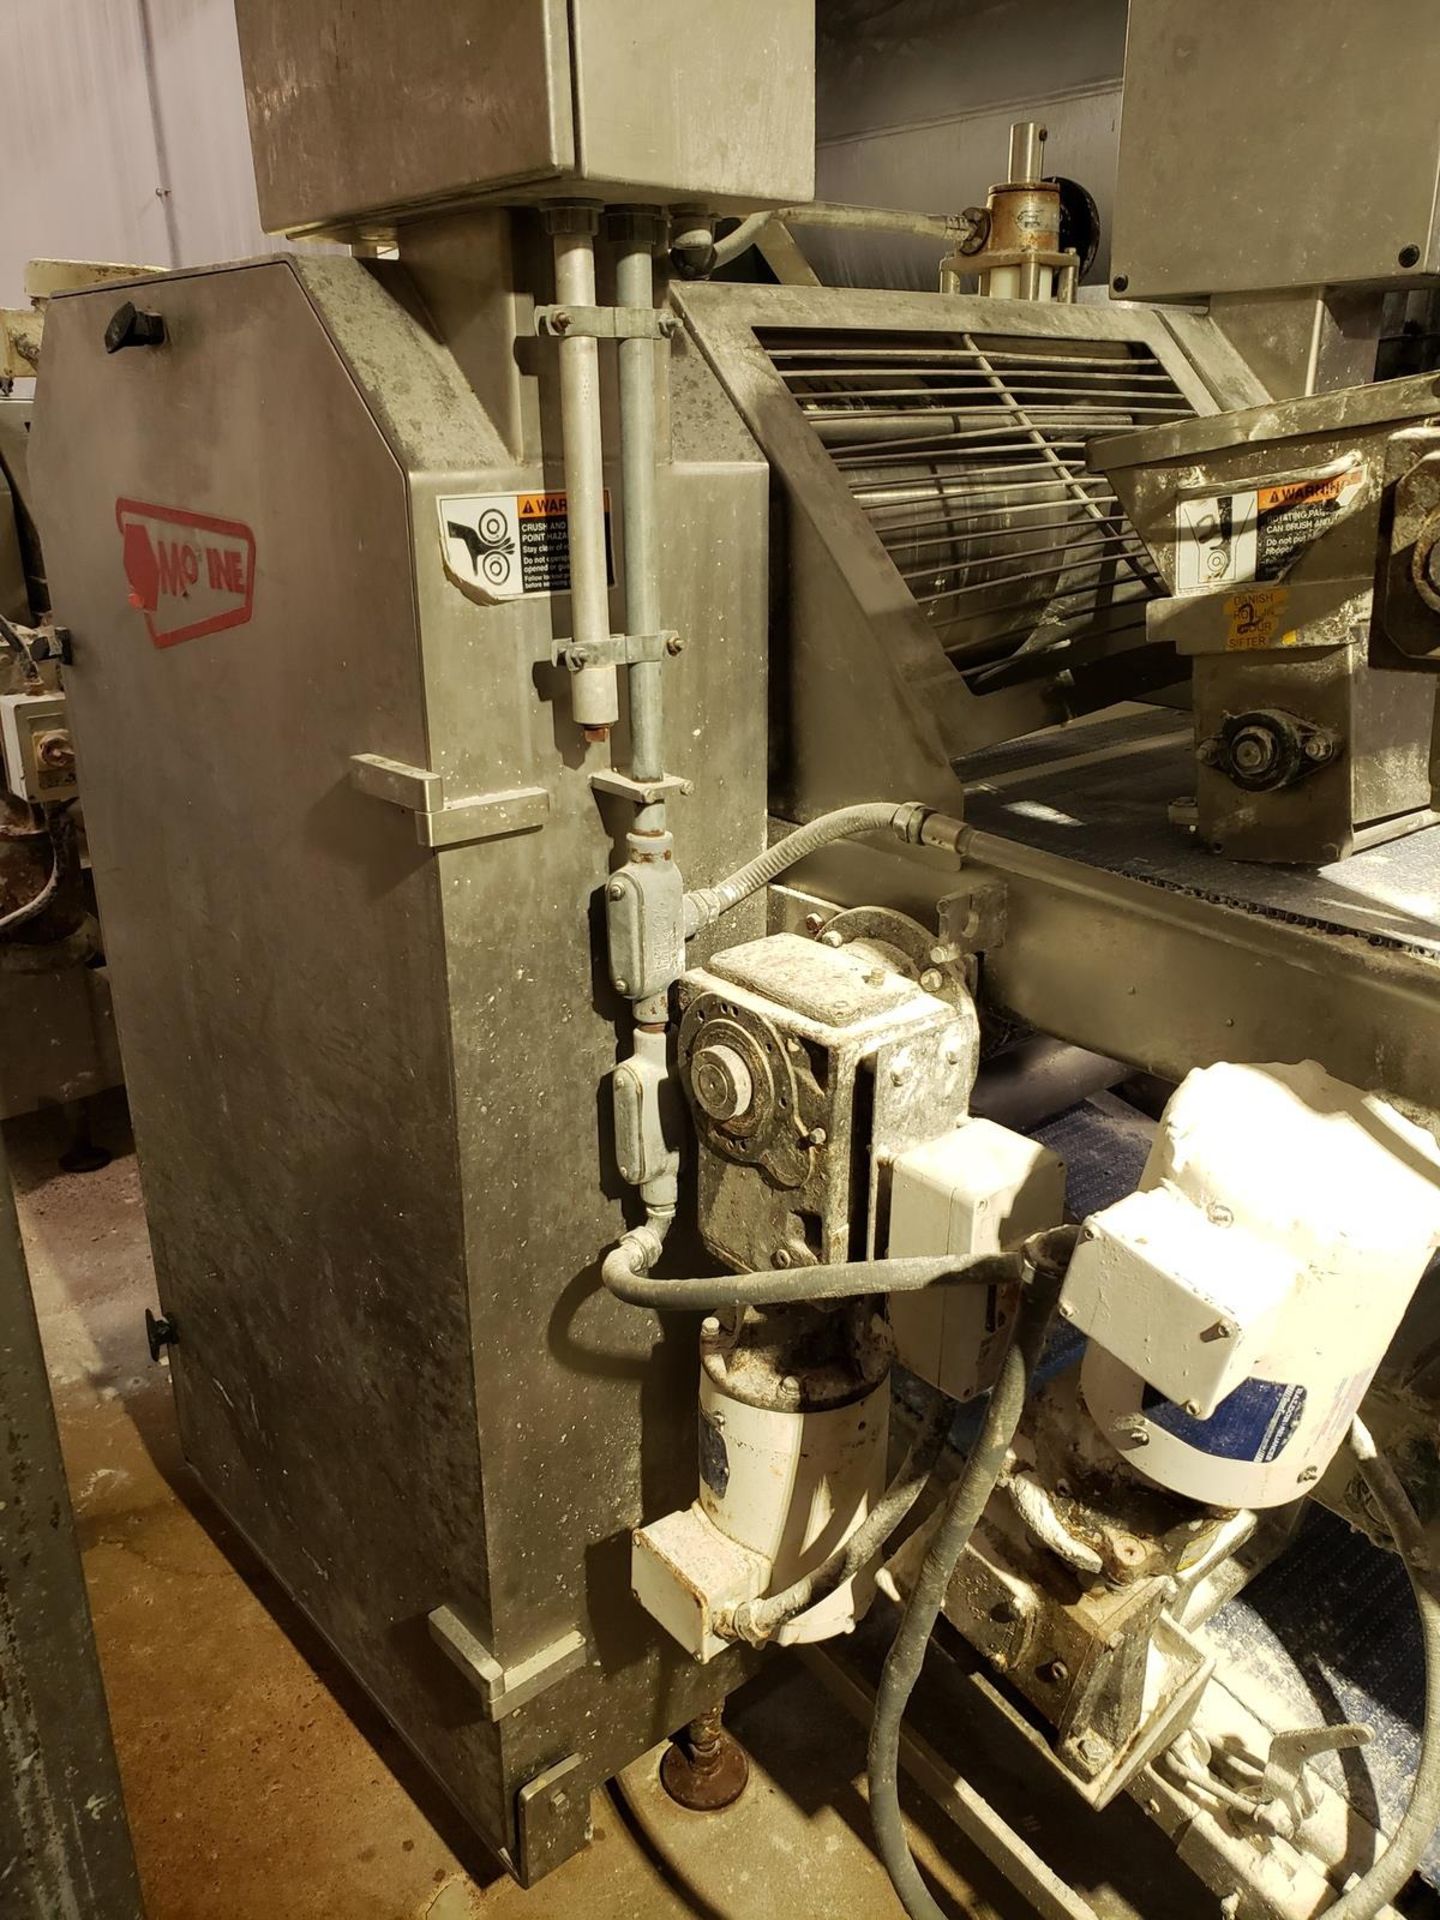 Moline 24" Roll-In/Laminateng Line, W/ (2) Sheeters, Sifters & Reciprocating Dough Depositor - Image 3 of 10